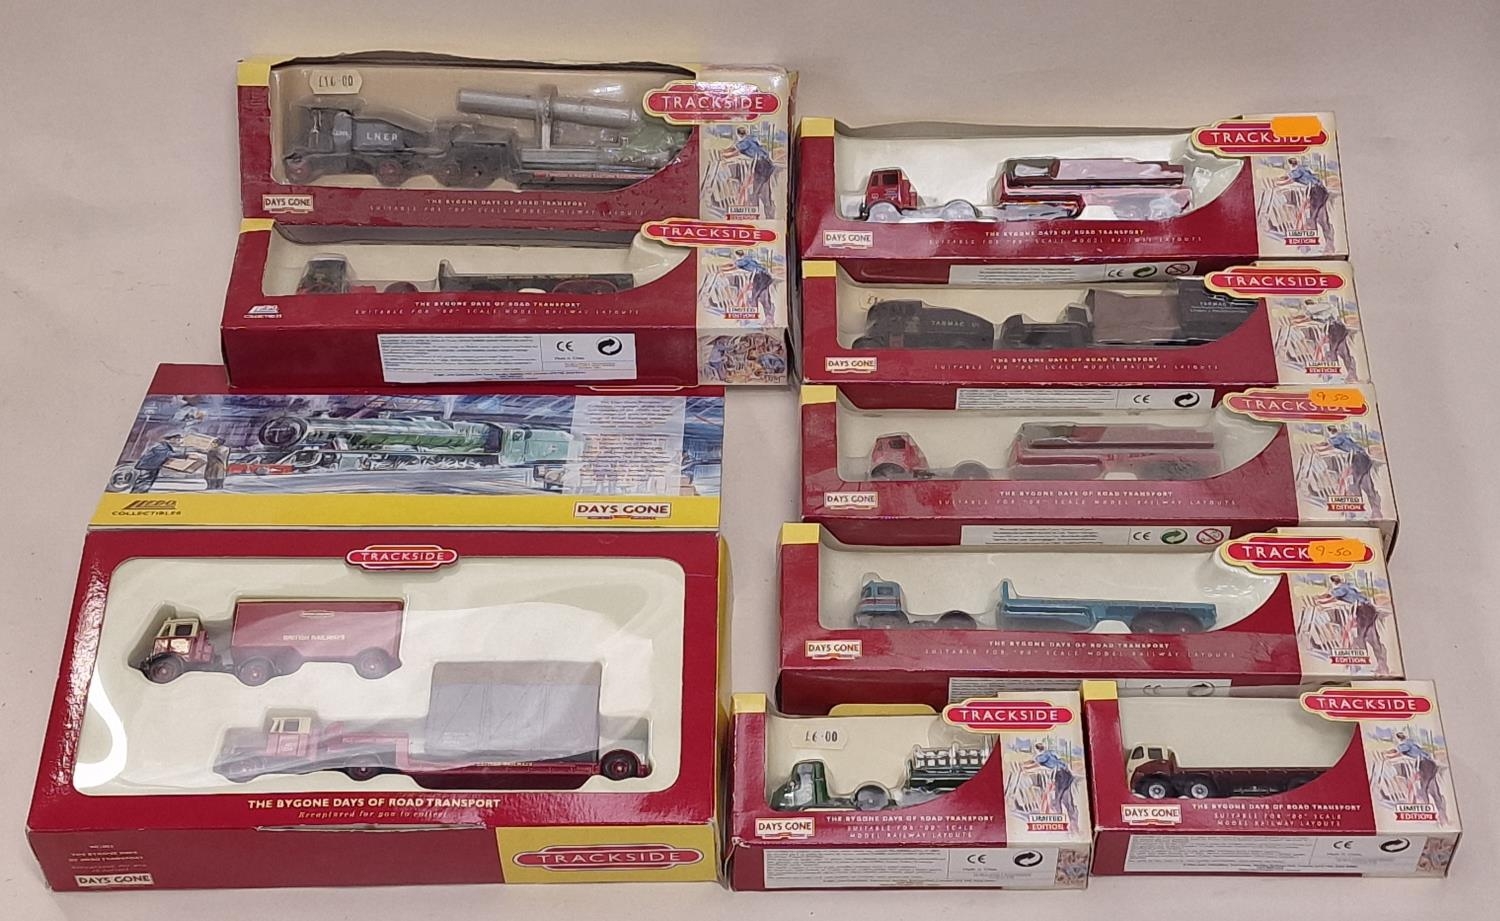 Lledo Trackside boxed die cast group. Some of the boxes need a clean (9).